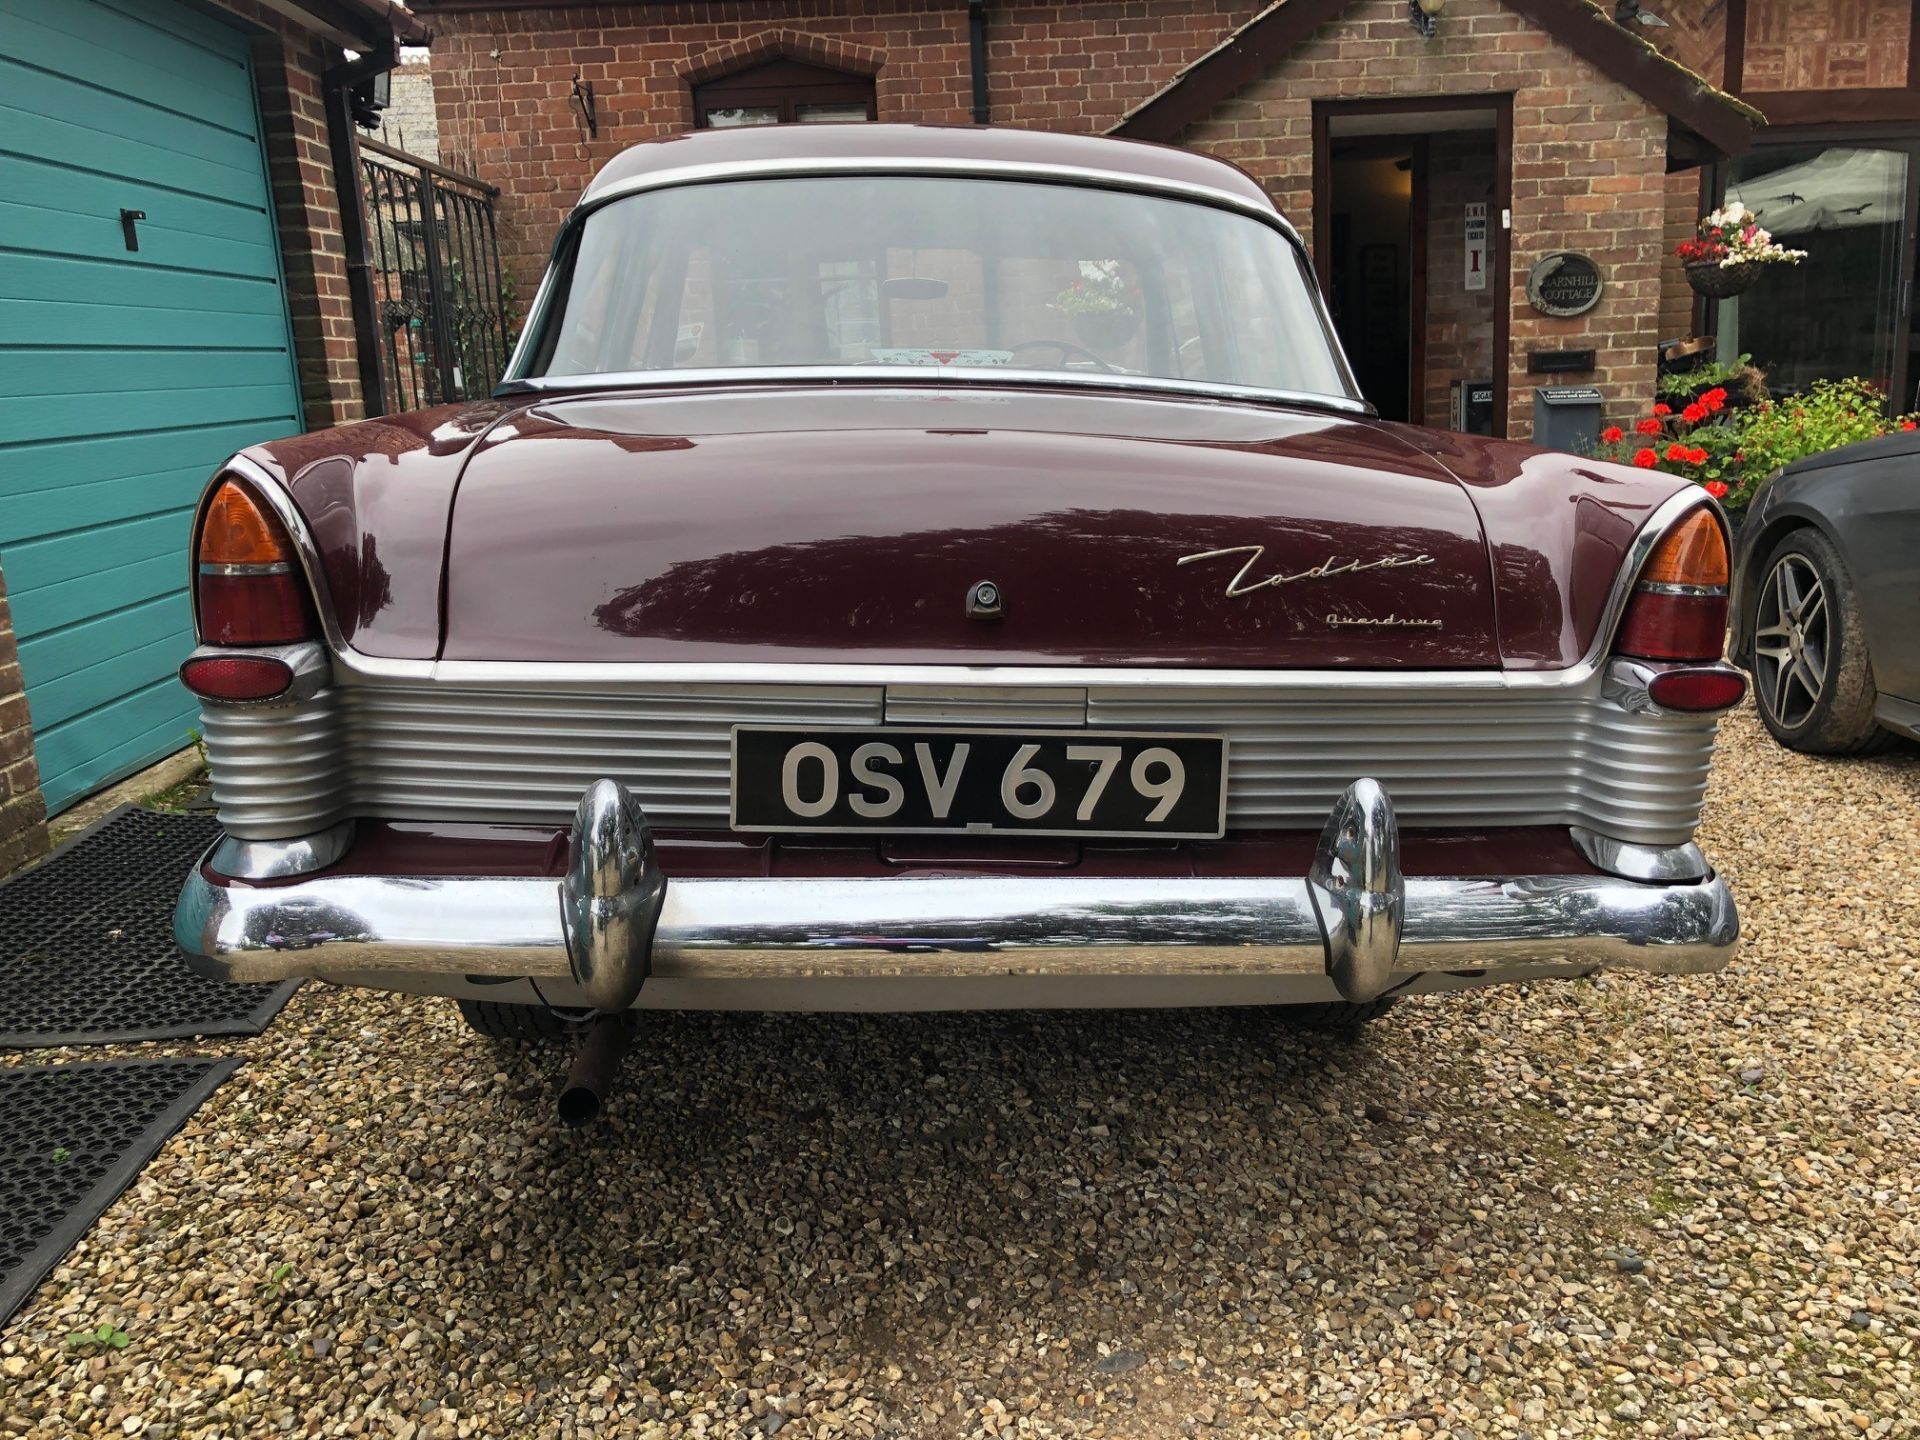 1960 Ford Zodiac Registration number OSV 679 Chassis number 206E306134 Maroon over grey Vinyl and - Image 29 of 70